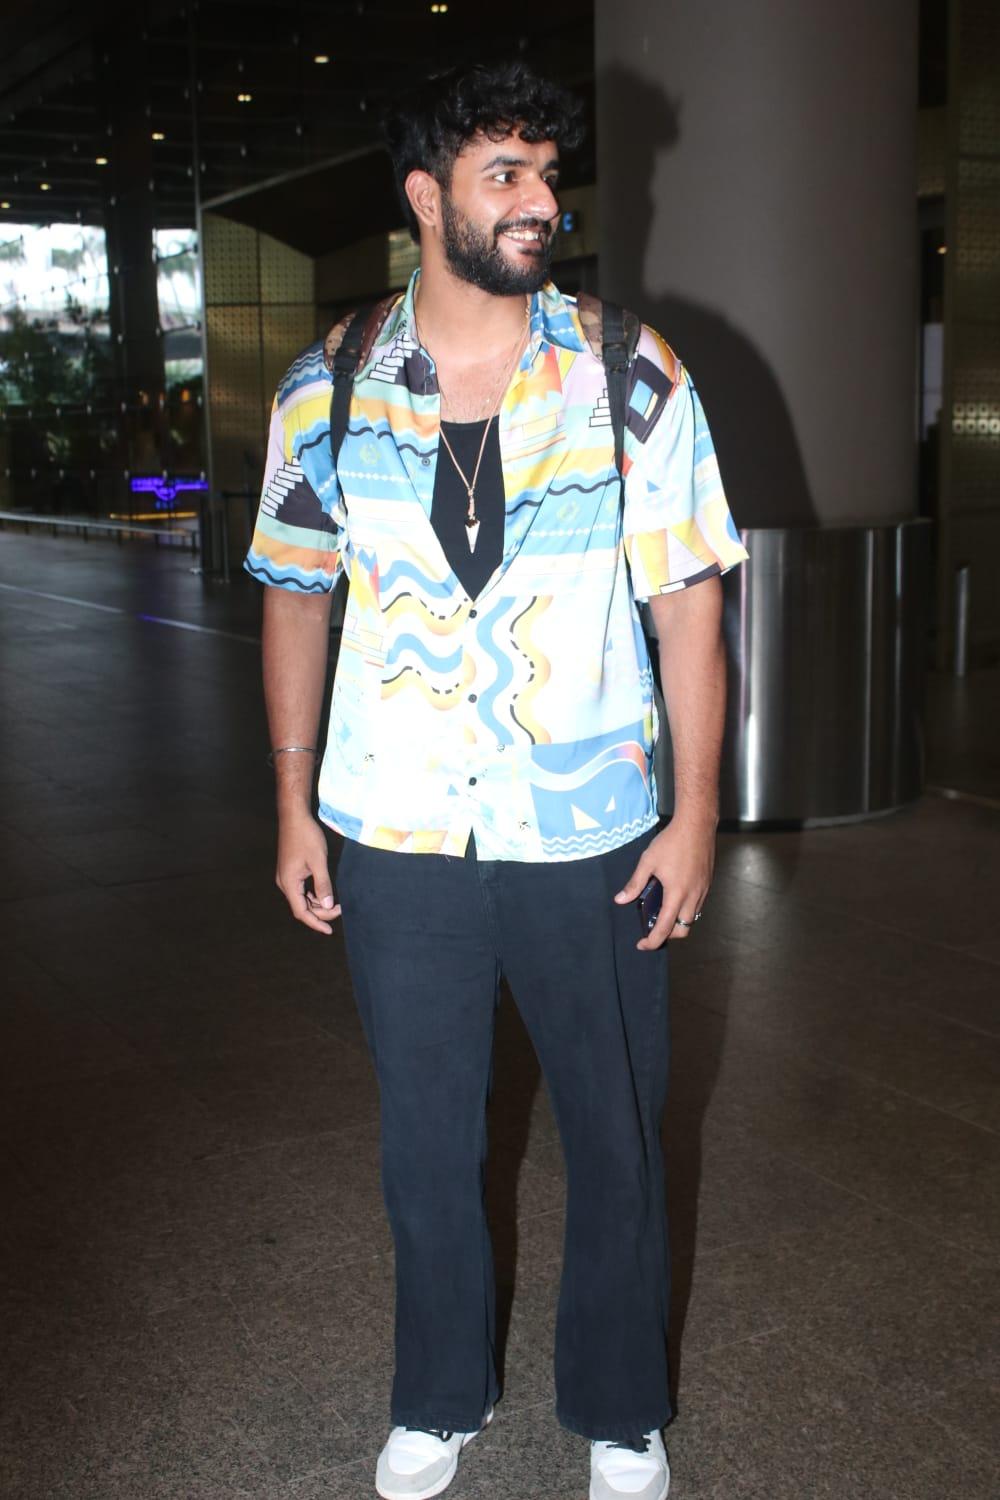 Abhishek Malhan, who gained fame on Big Boss OTT, was spotted at the airport.